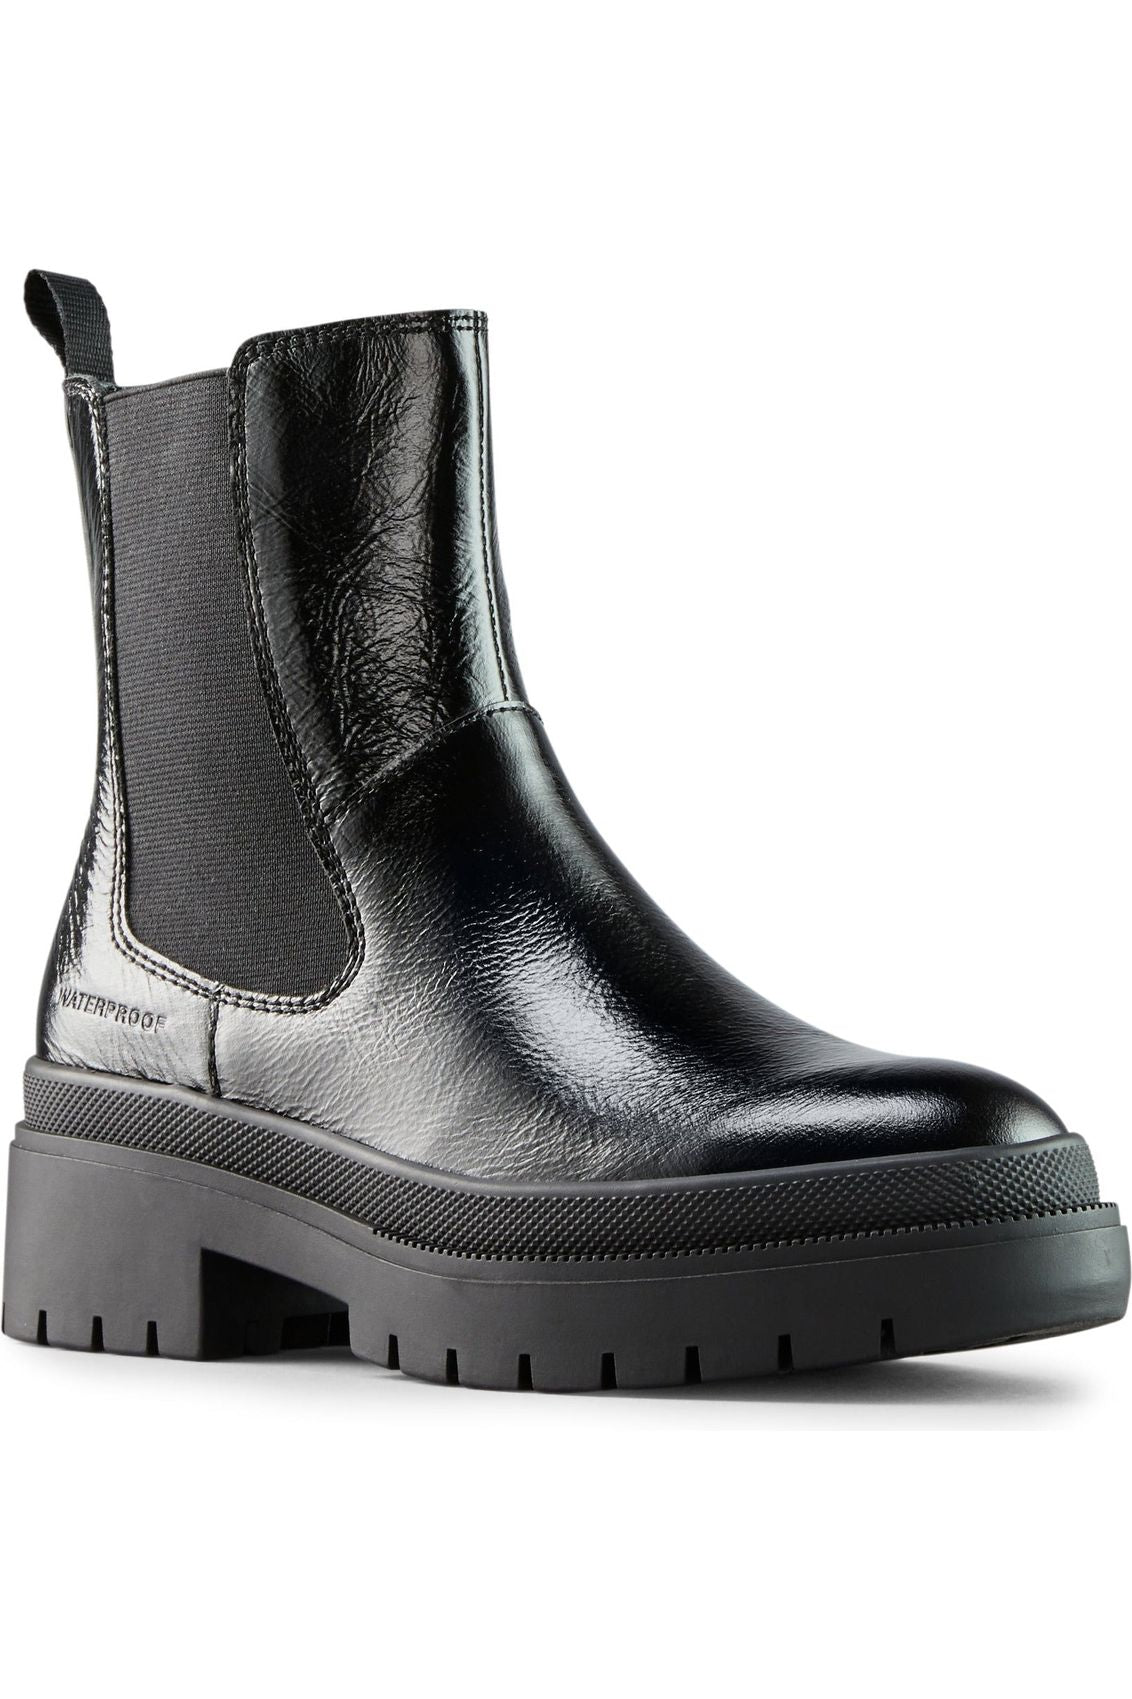 Cougar Waterproof Mid-Height Chelsea Boot - Style Swinton-CPL, front angle